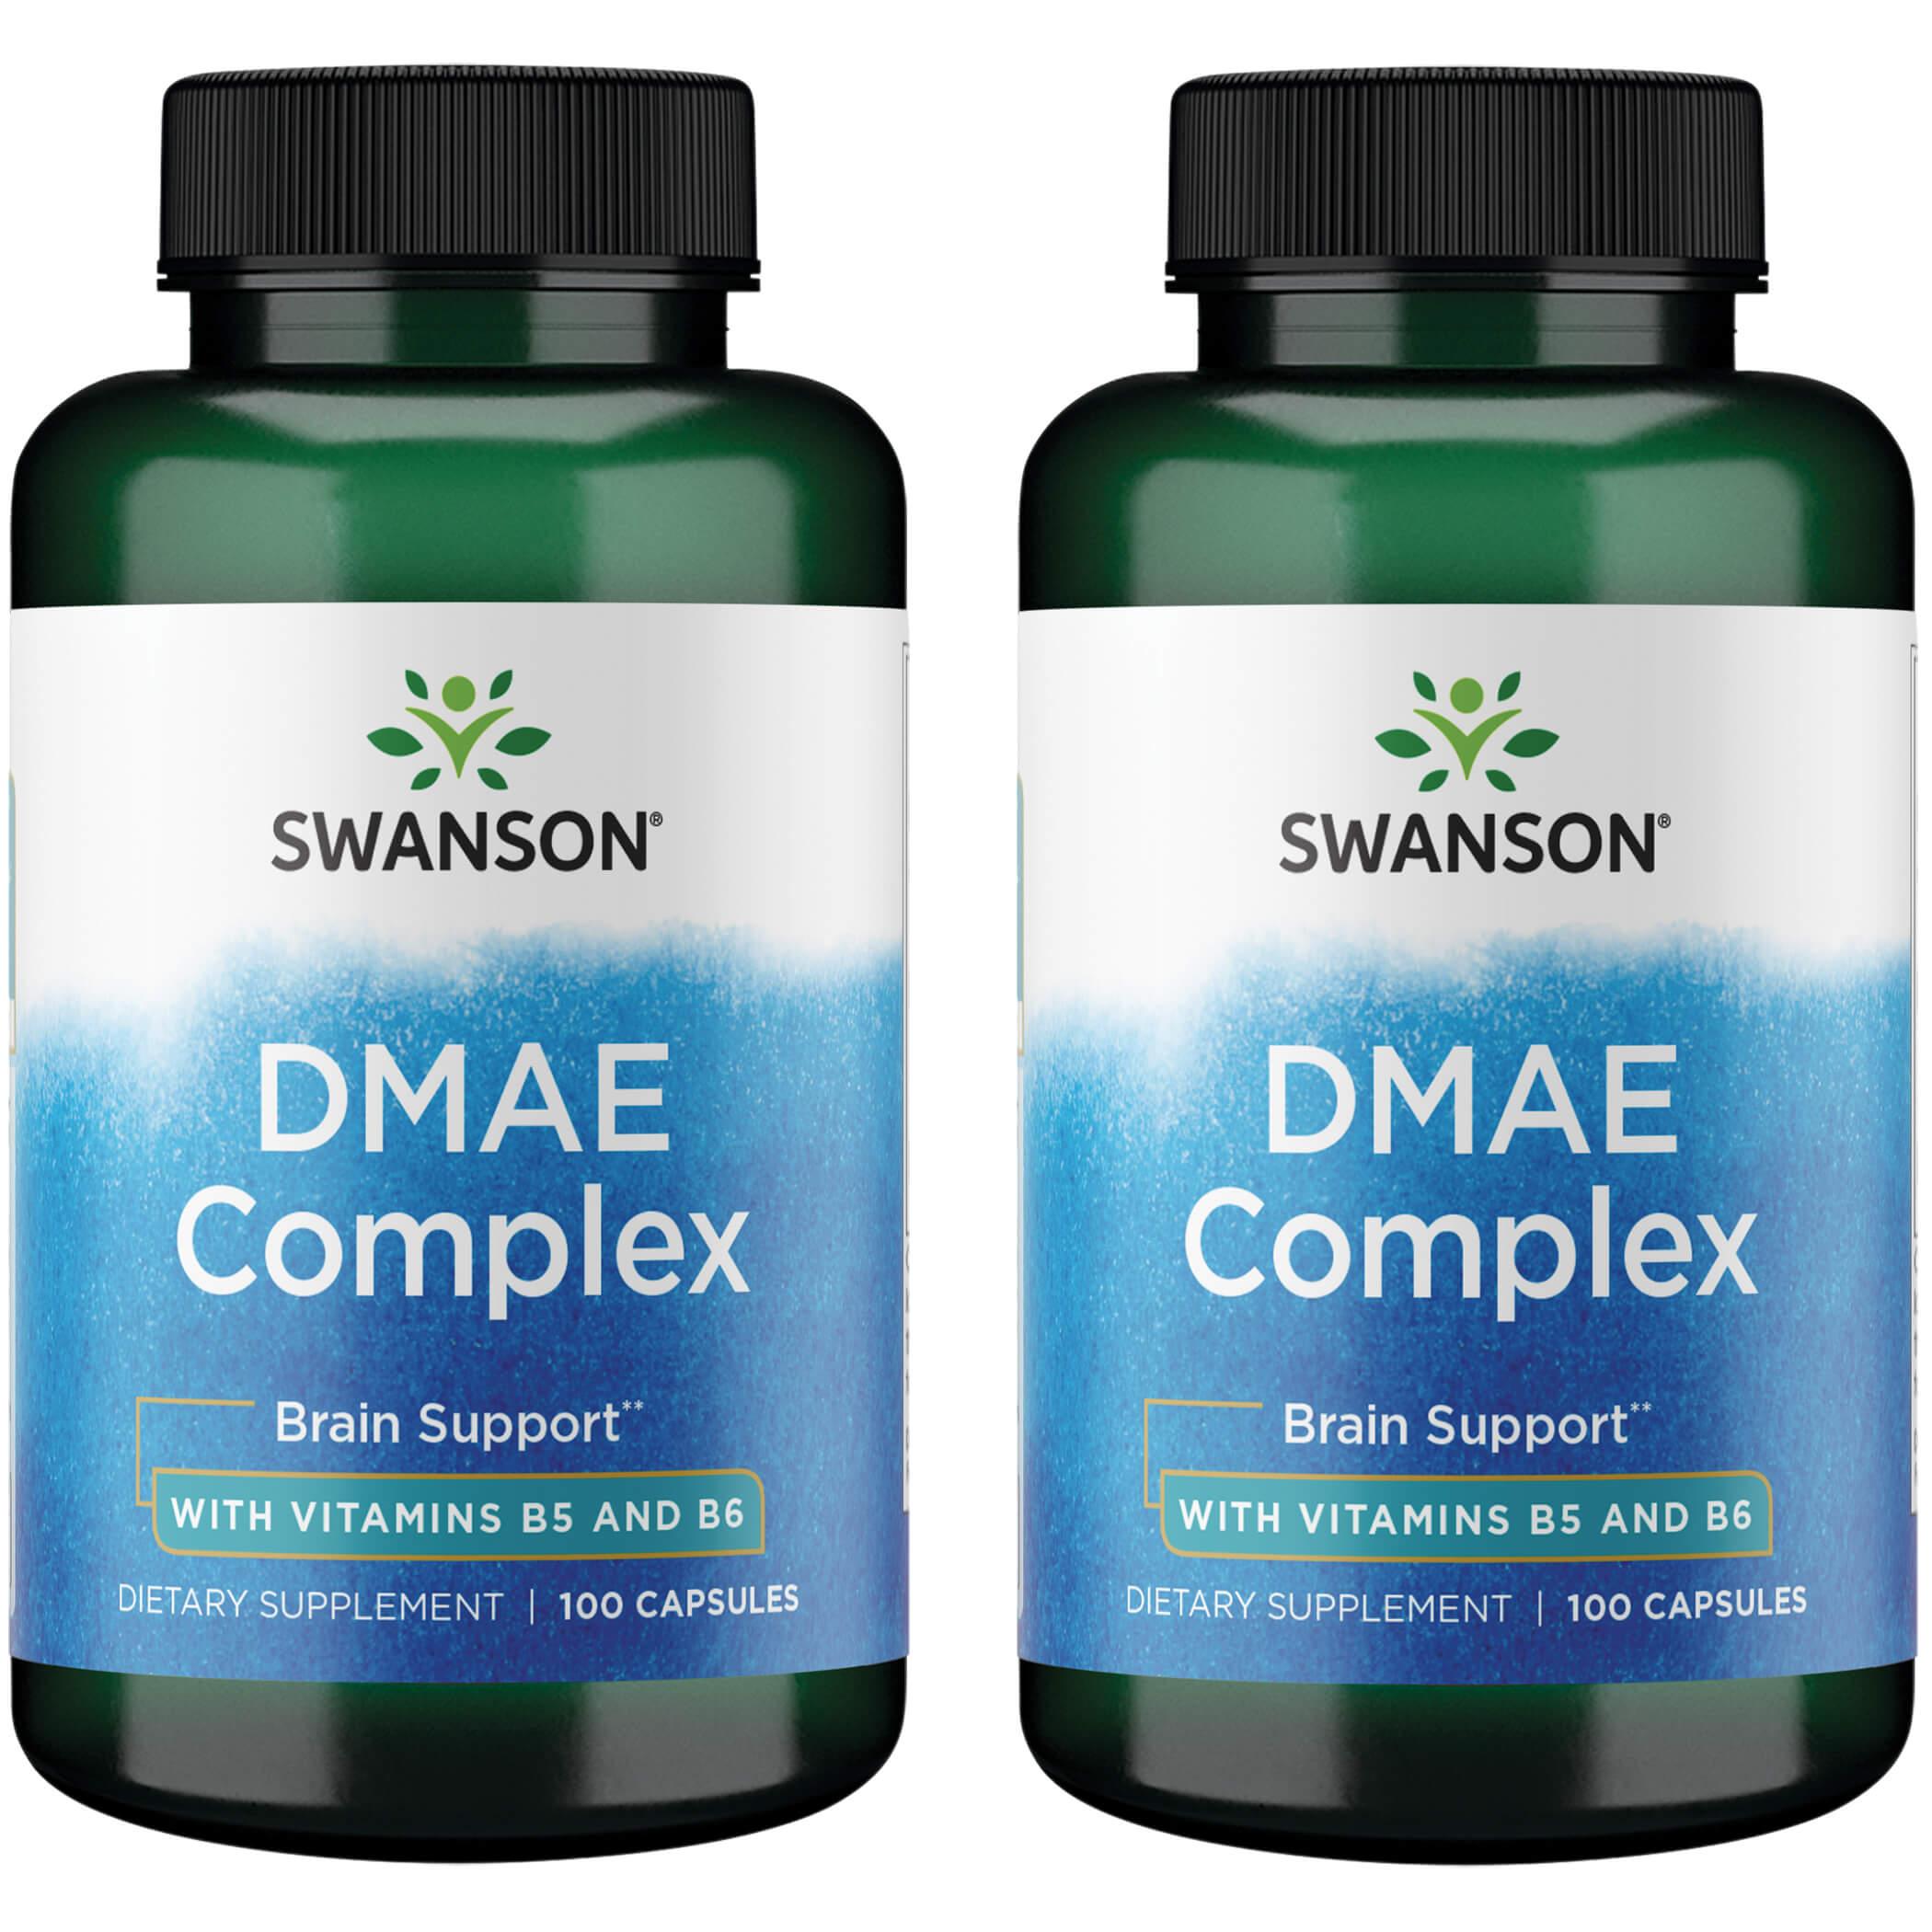 Swanson Premium Dmae Complex with Vitamins B5 and B6 2 Pack 130 mg 100 Caps